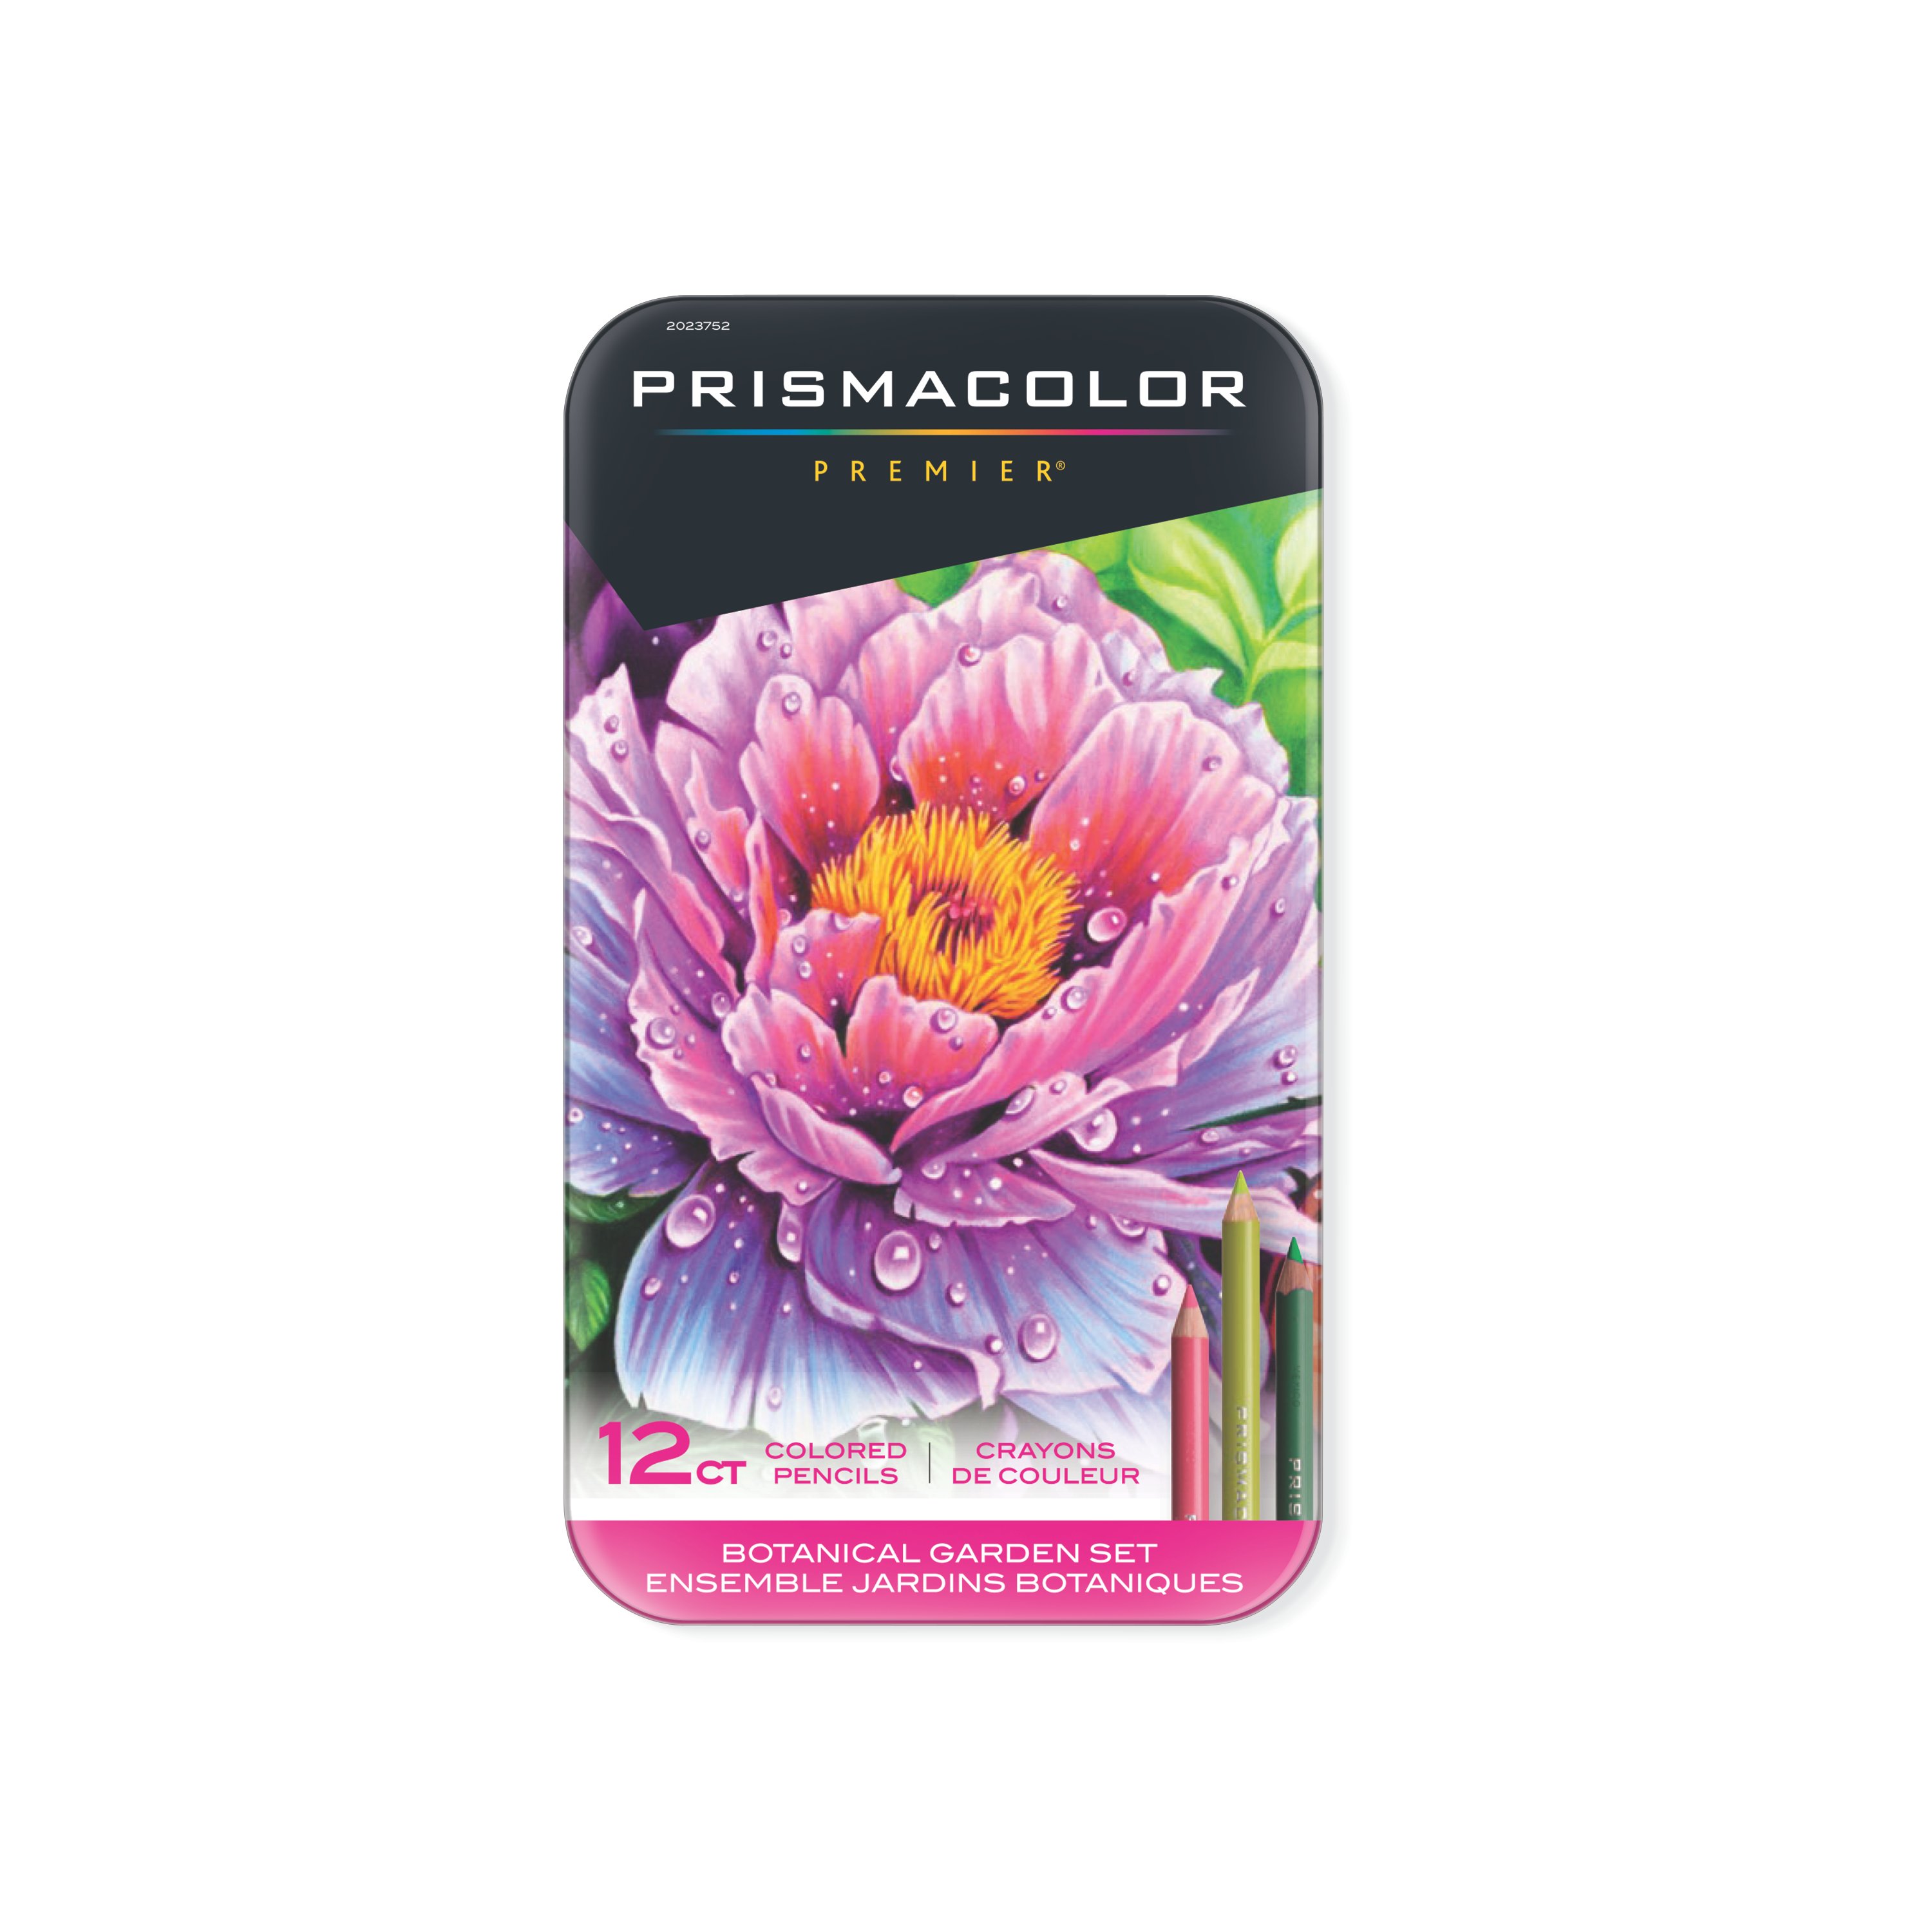 https://s7d9.scene7.com/is/image//NewellRubbermaid/2023752-prismacolor-botanical-garden-colored-pencil-set-12ct-in-pack-1-2